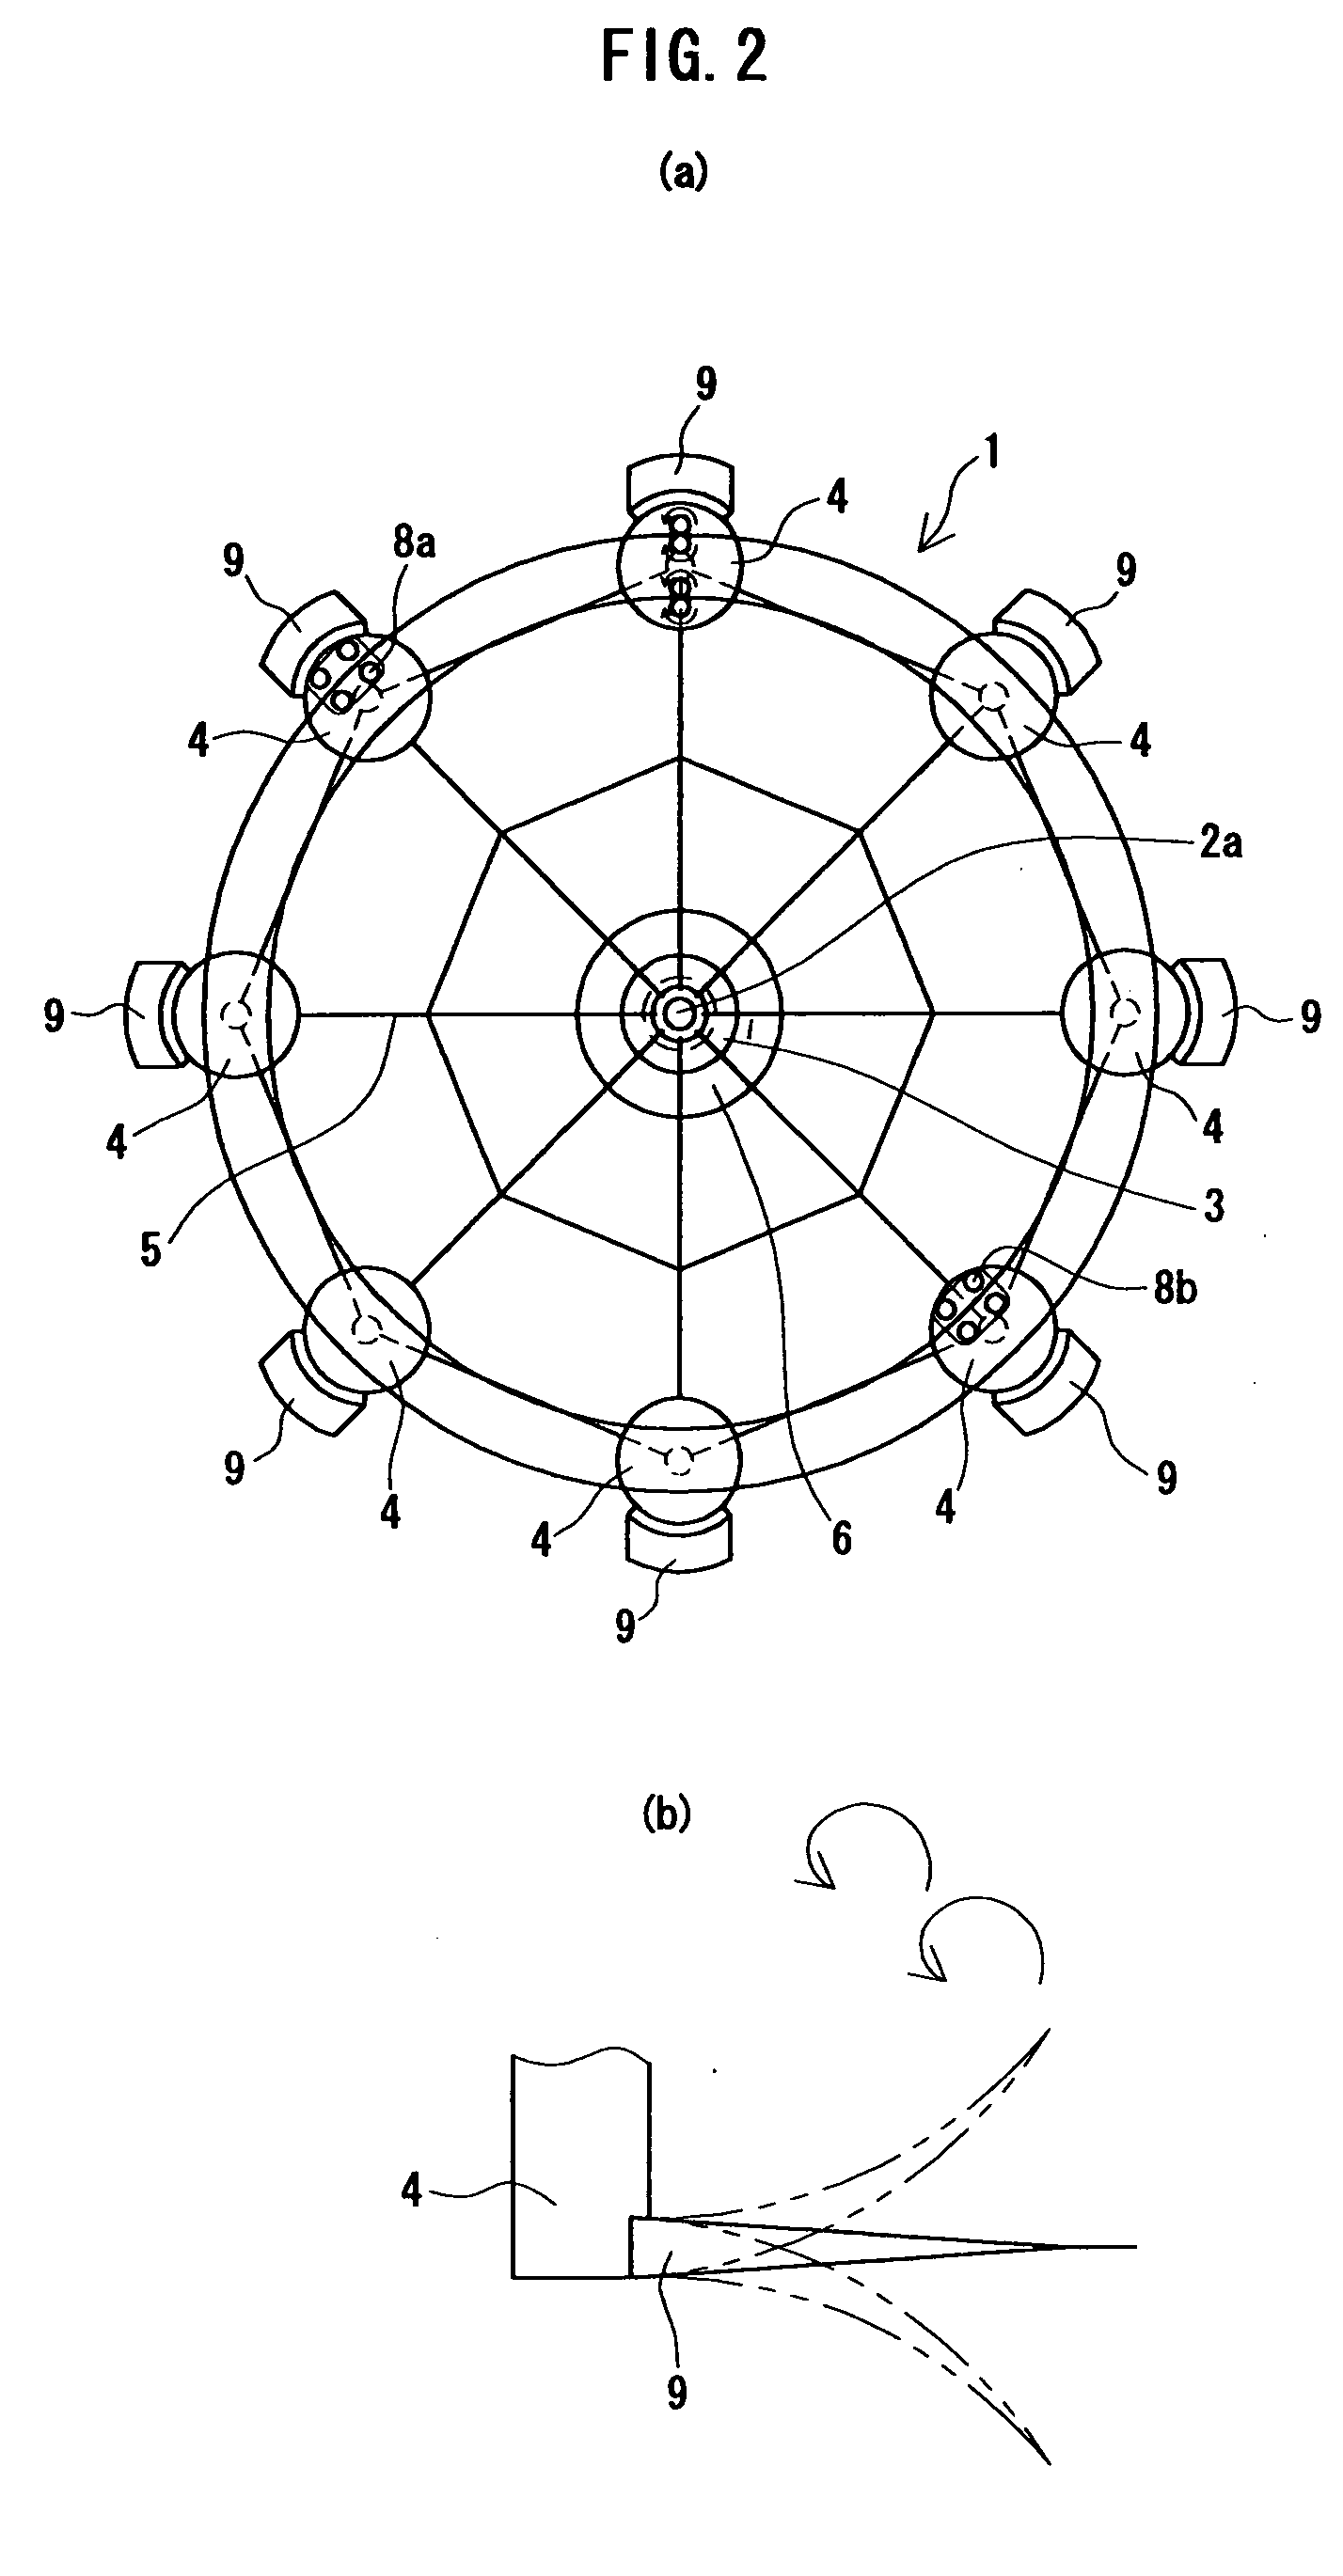 Float type base structure for wind power generationon the ocean